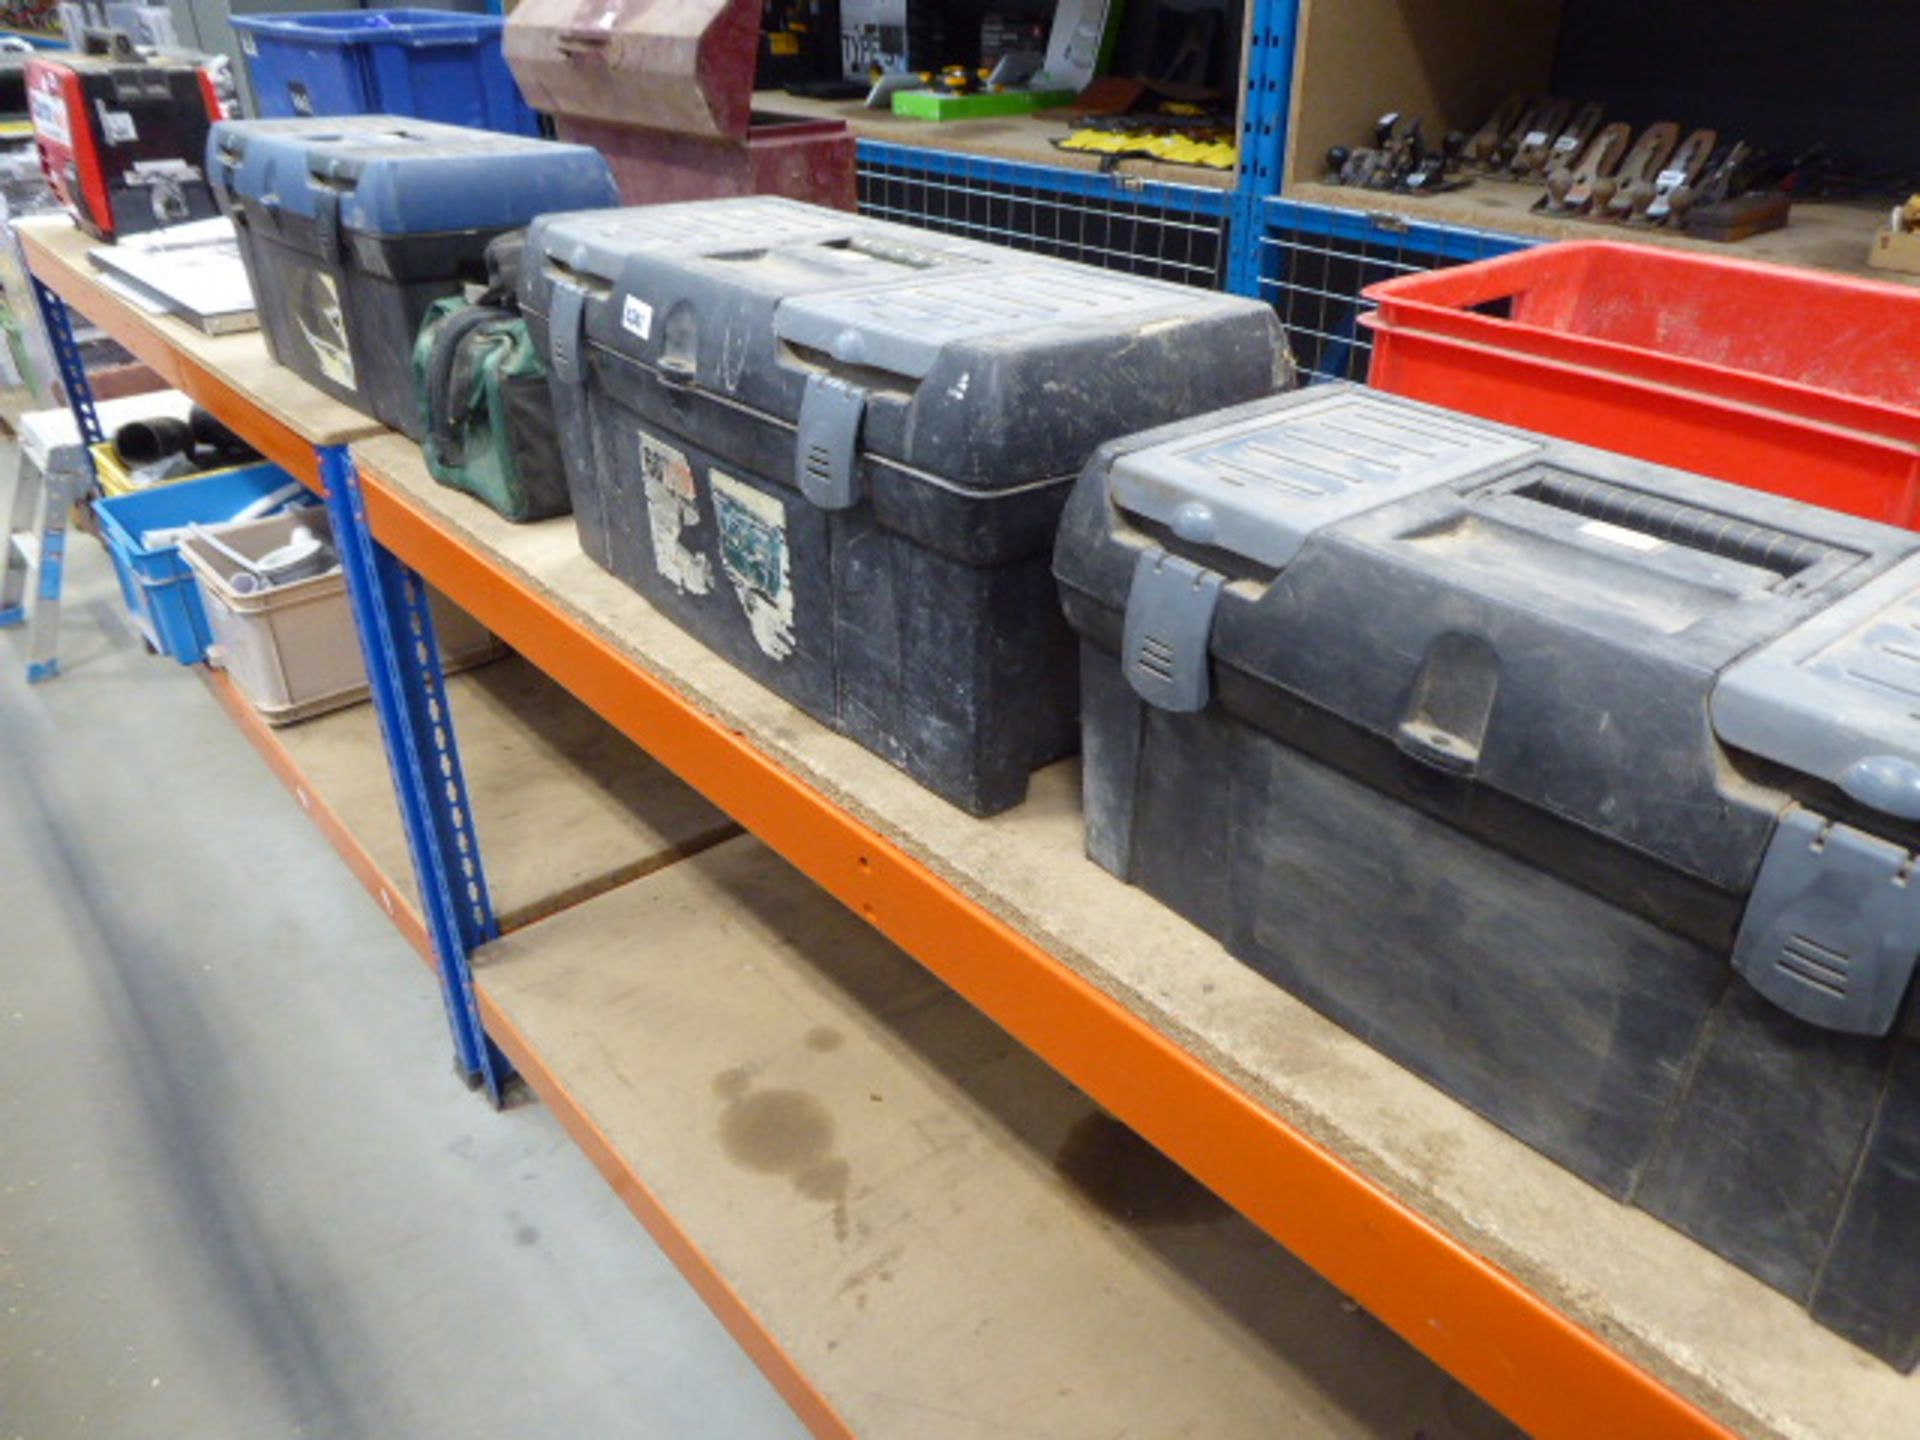 3 plastic tool boxes containing kneeling pads, air fittings, socket sets, tools and a small Wickes